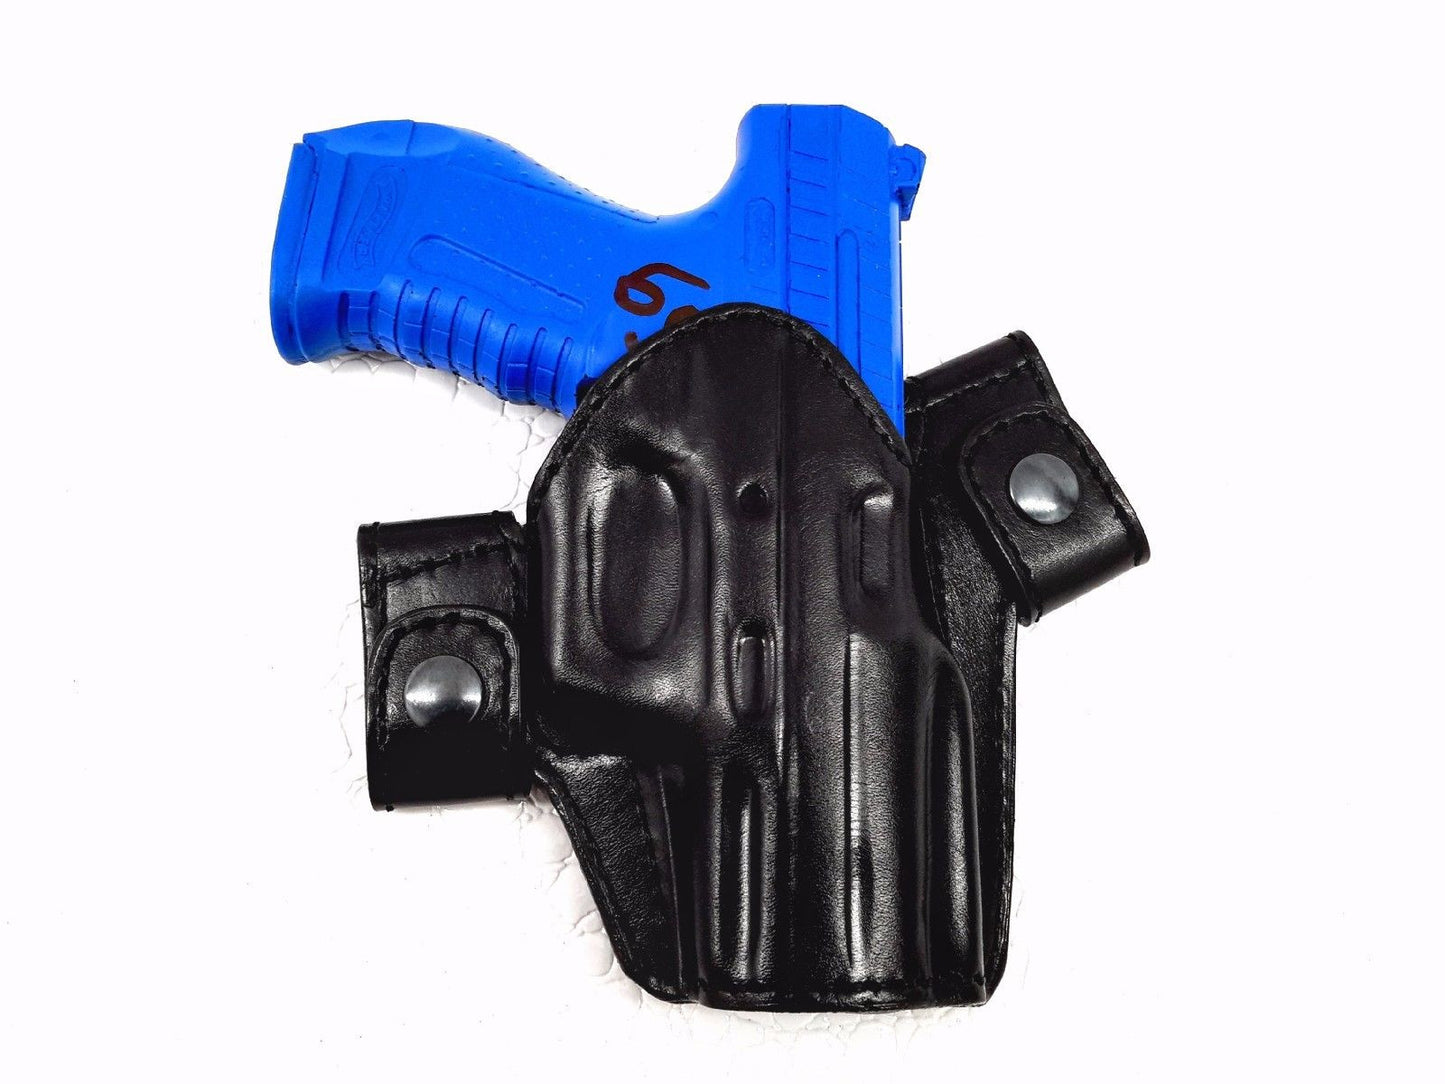 Snap-on Holster for EAA SAR K2P 9mm , MyHolster